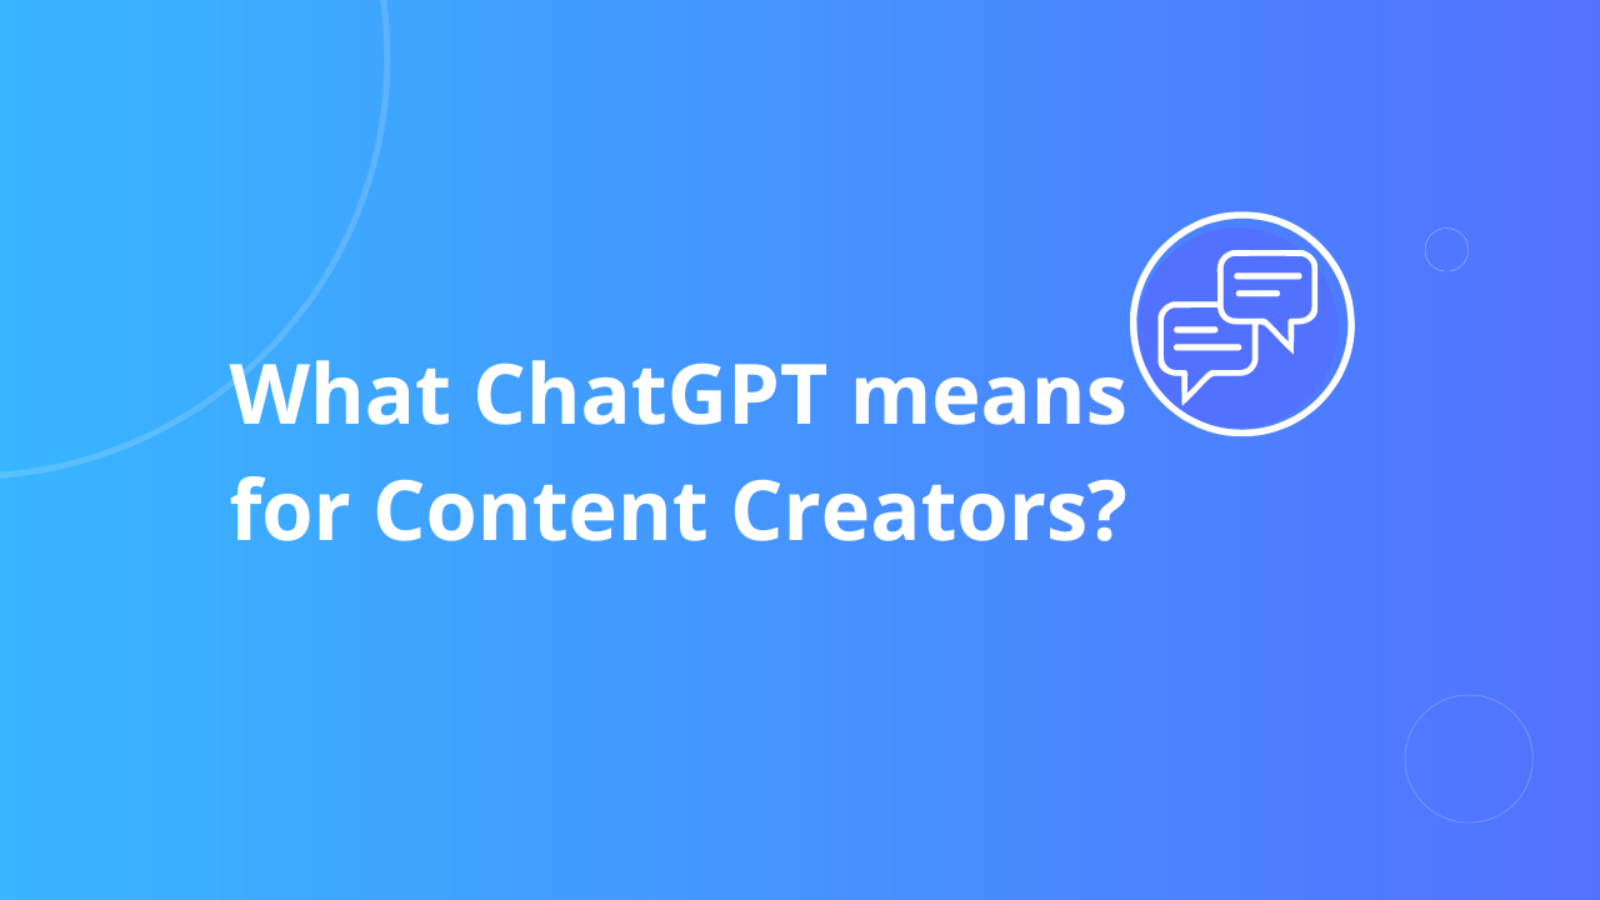 What Chatgpt means for Content Creators